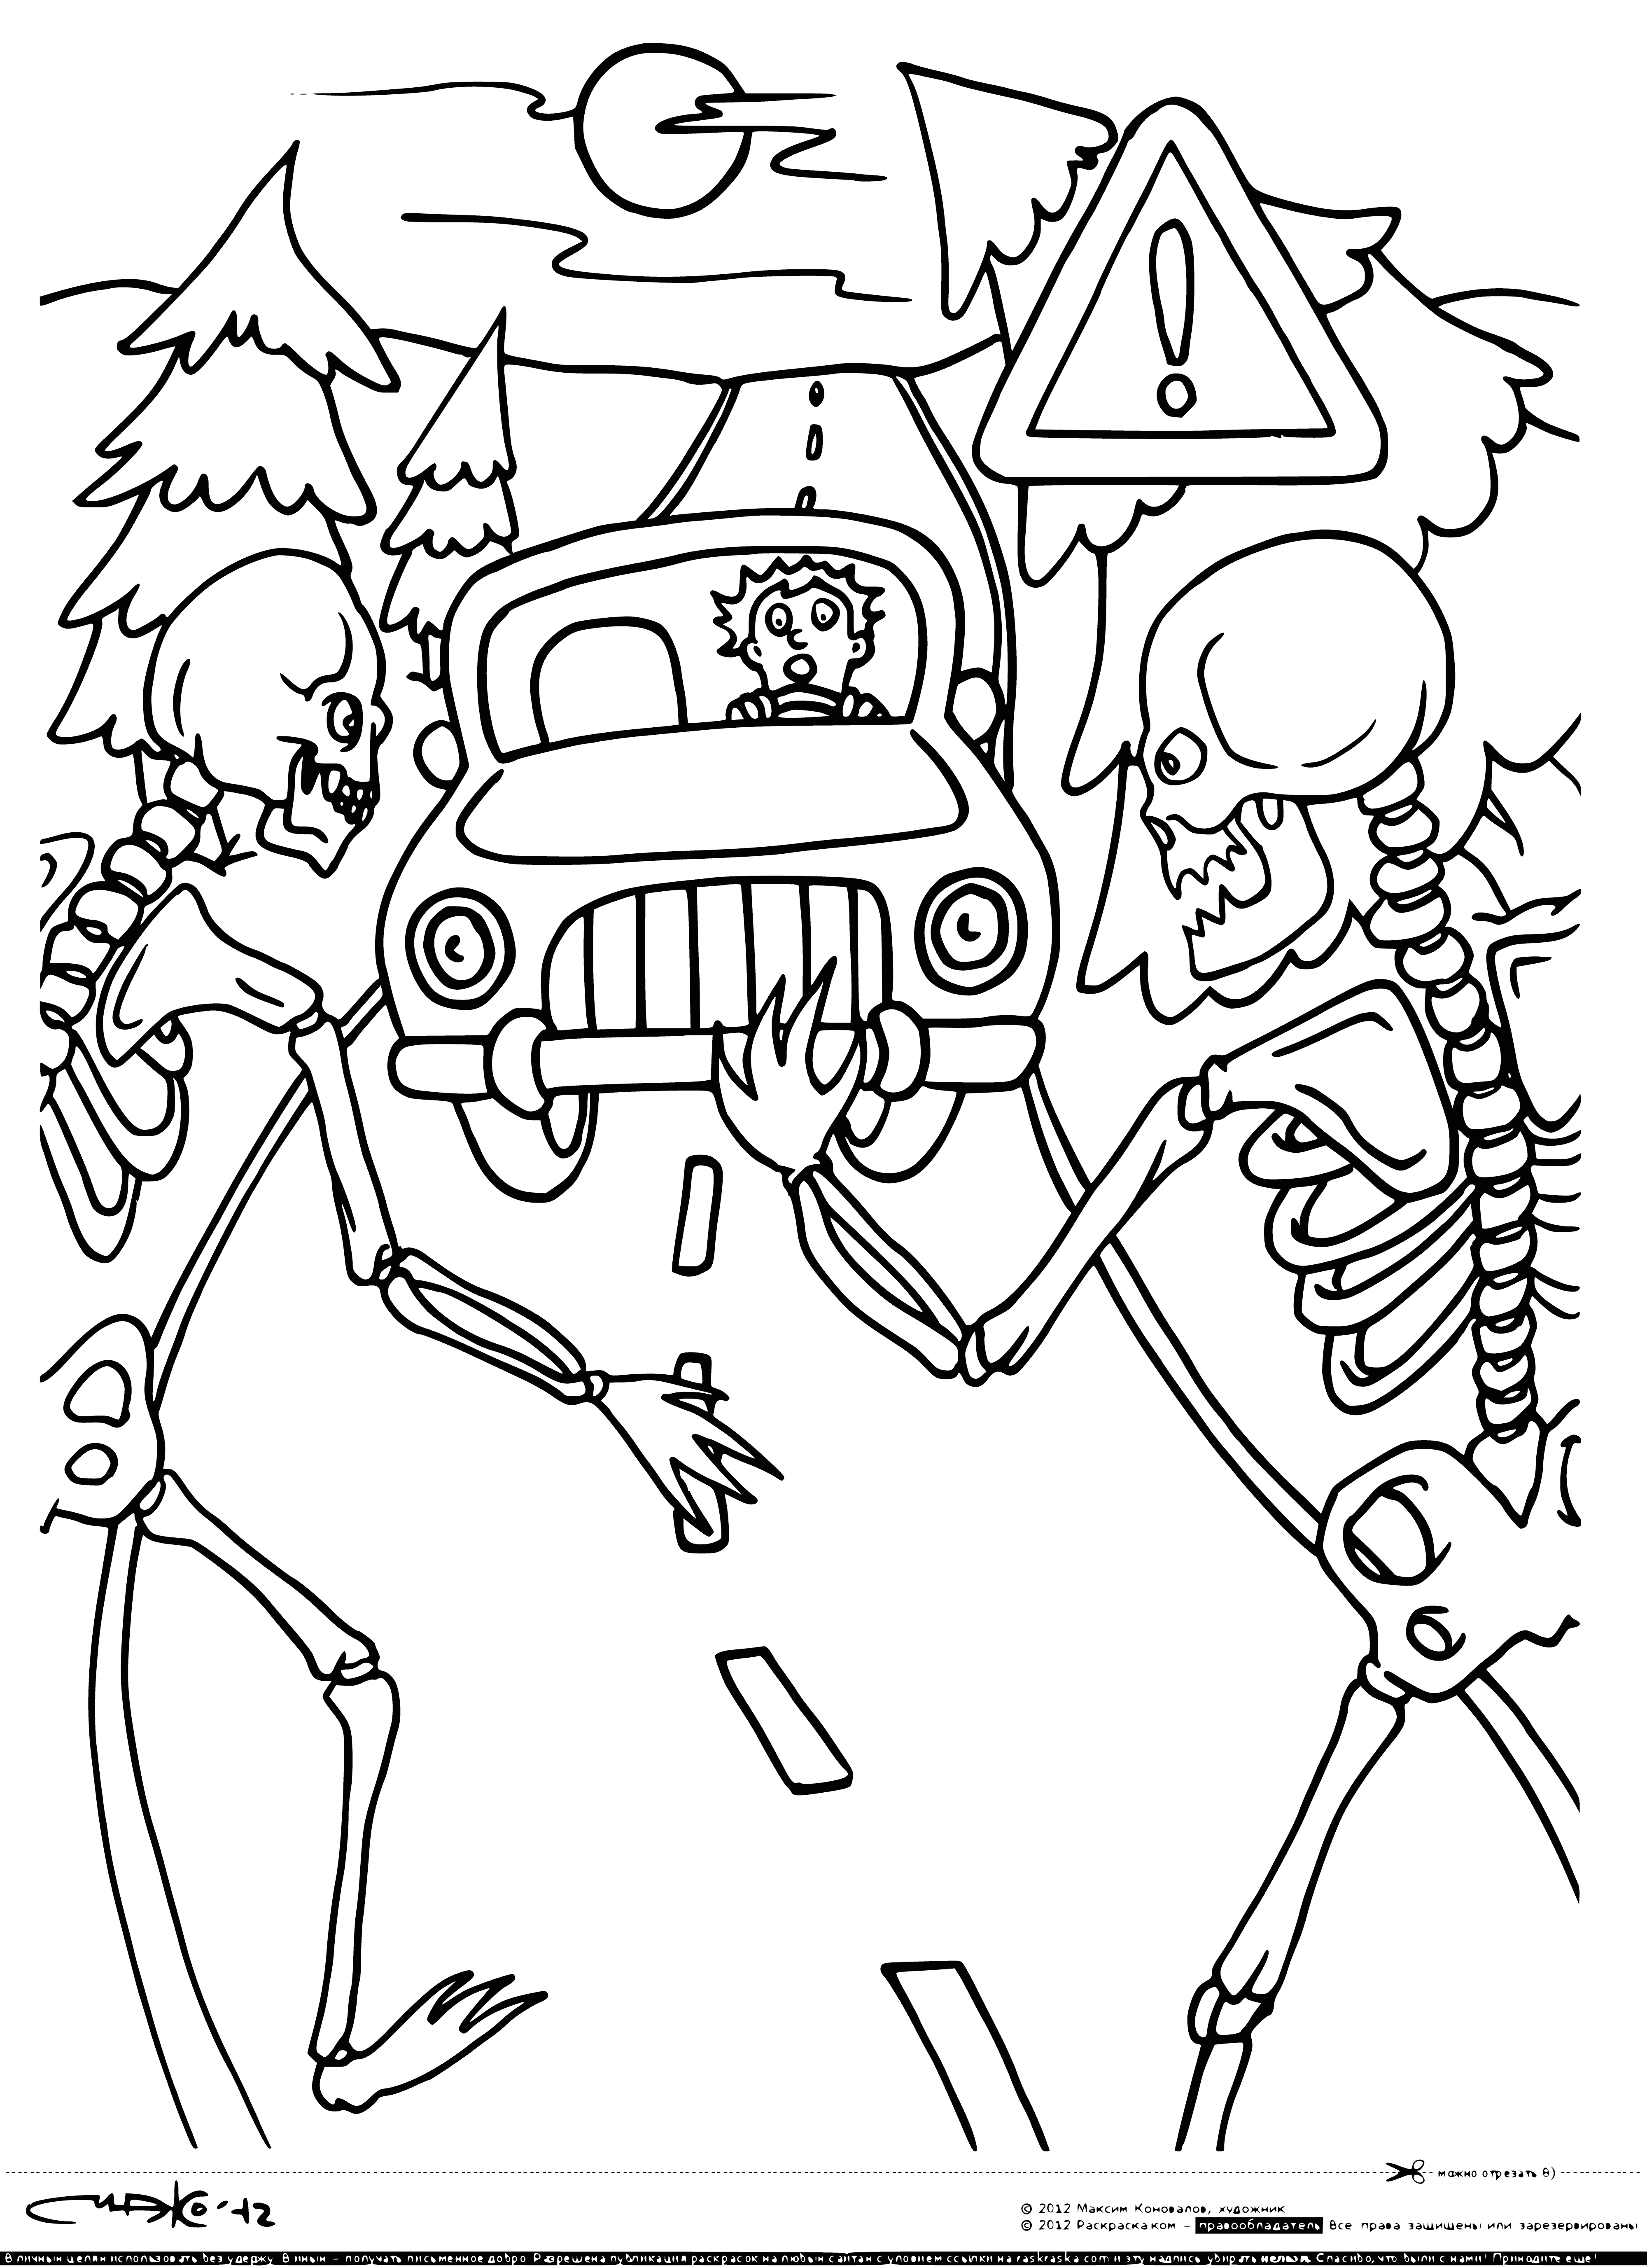 coloring page: Coloring page has two red & white signs: stop & yield, w/ black text. Stop has white background, yield has red.